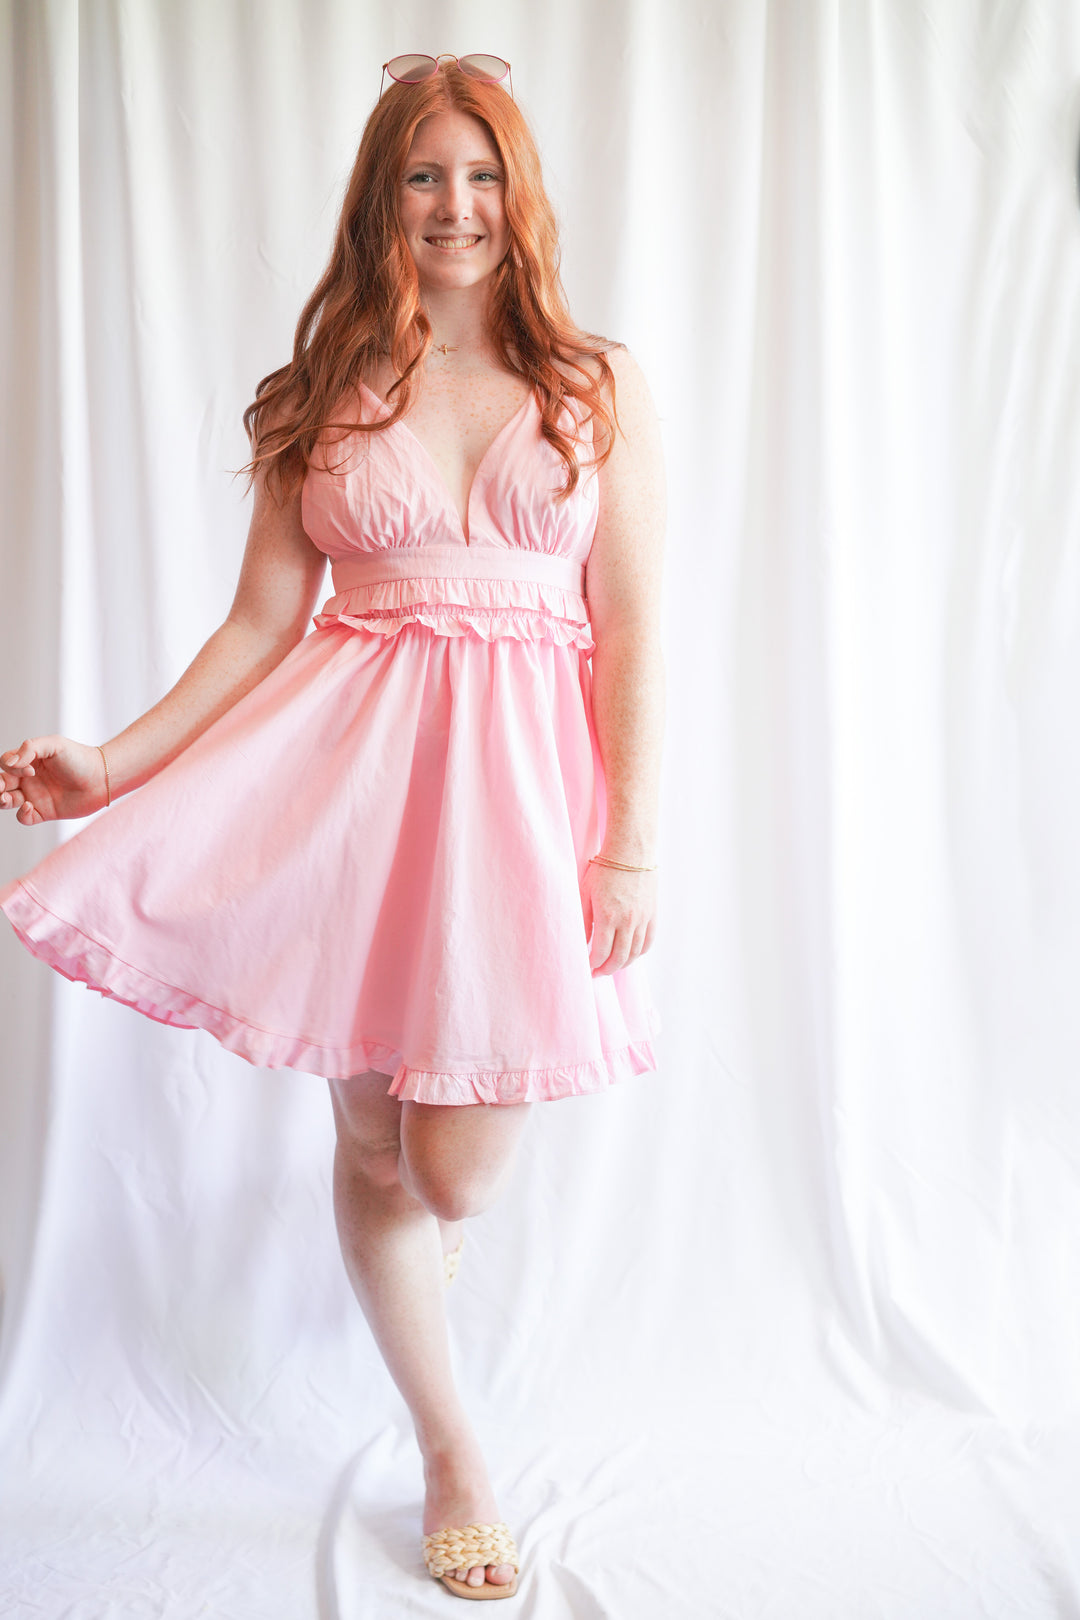 Pink sundress with deep v-neck opening and ruffle hem detail is made with 100% cotton